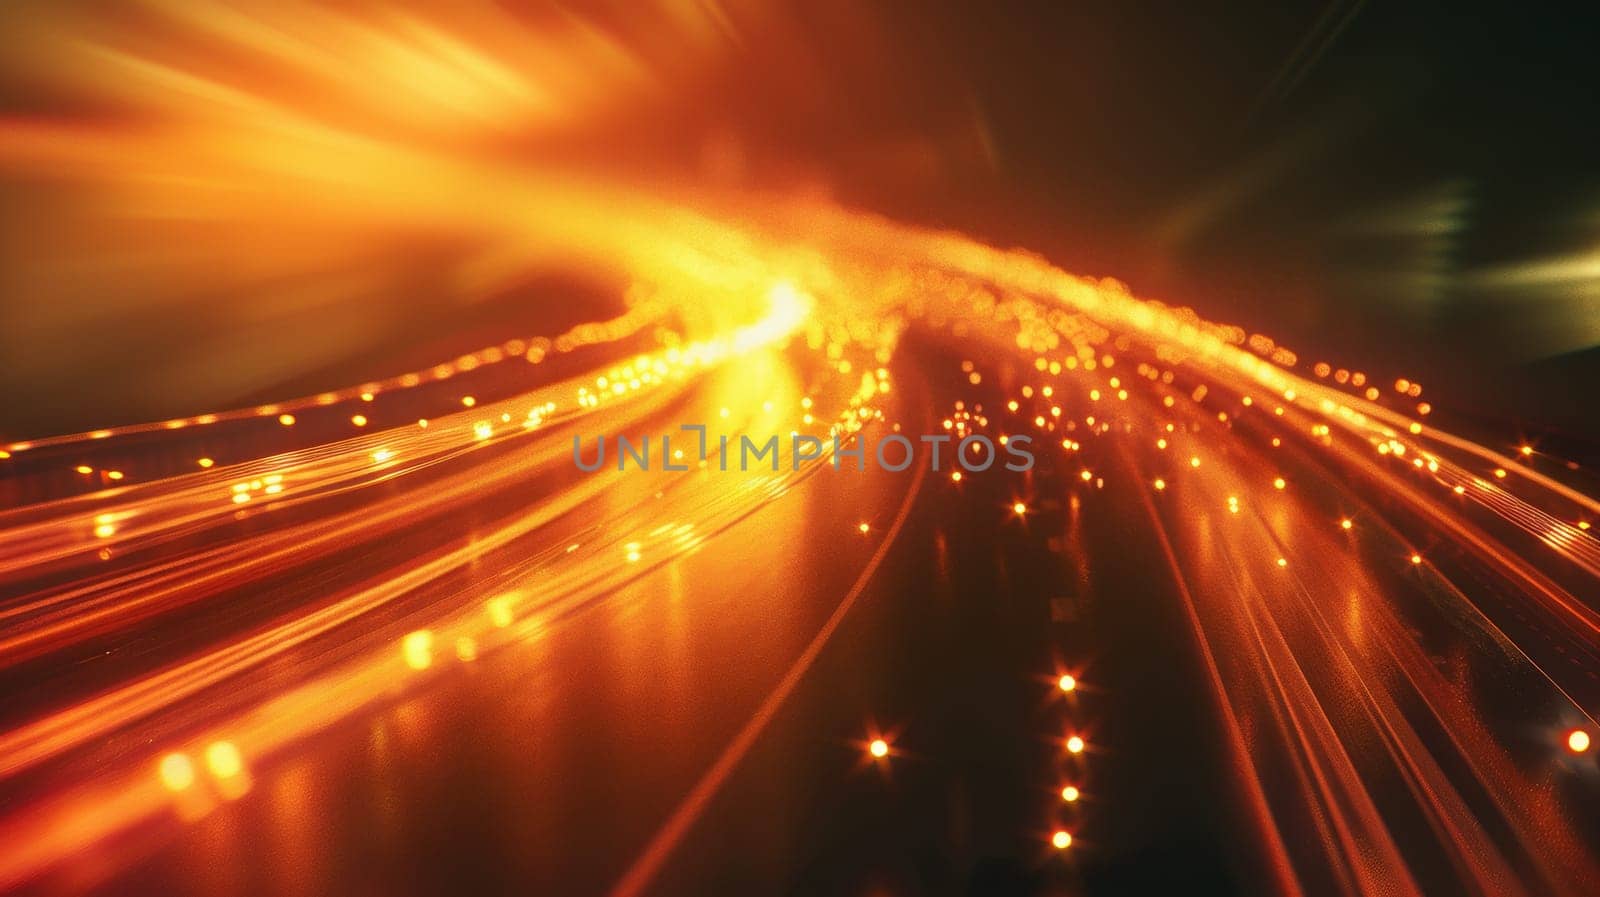 A blurry picture of a highway with lights on it